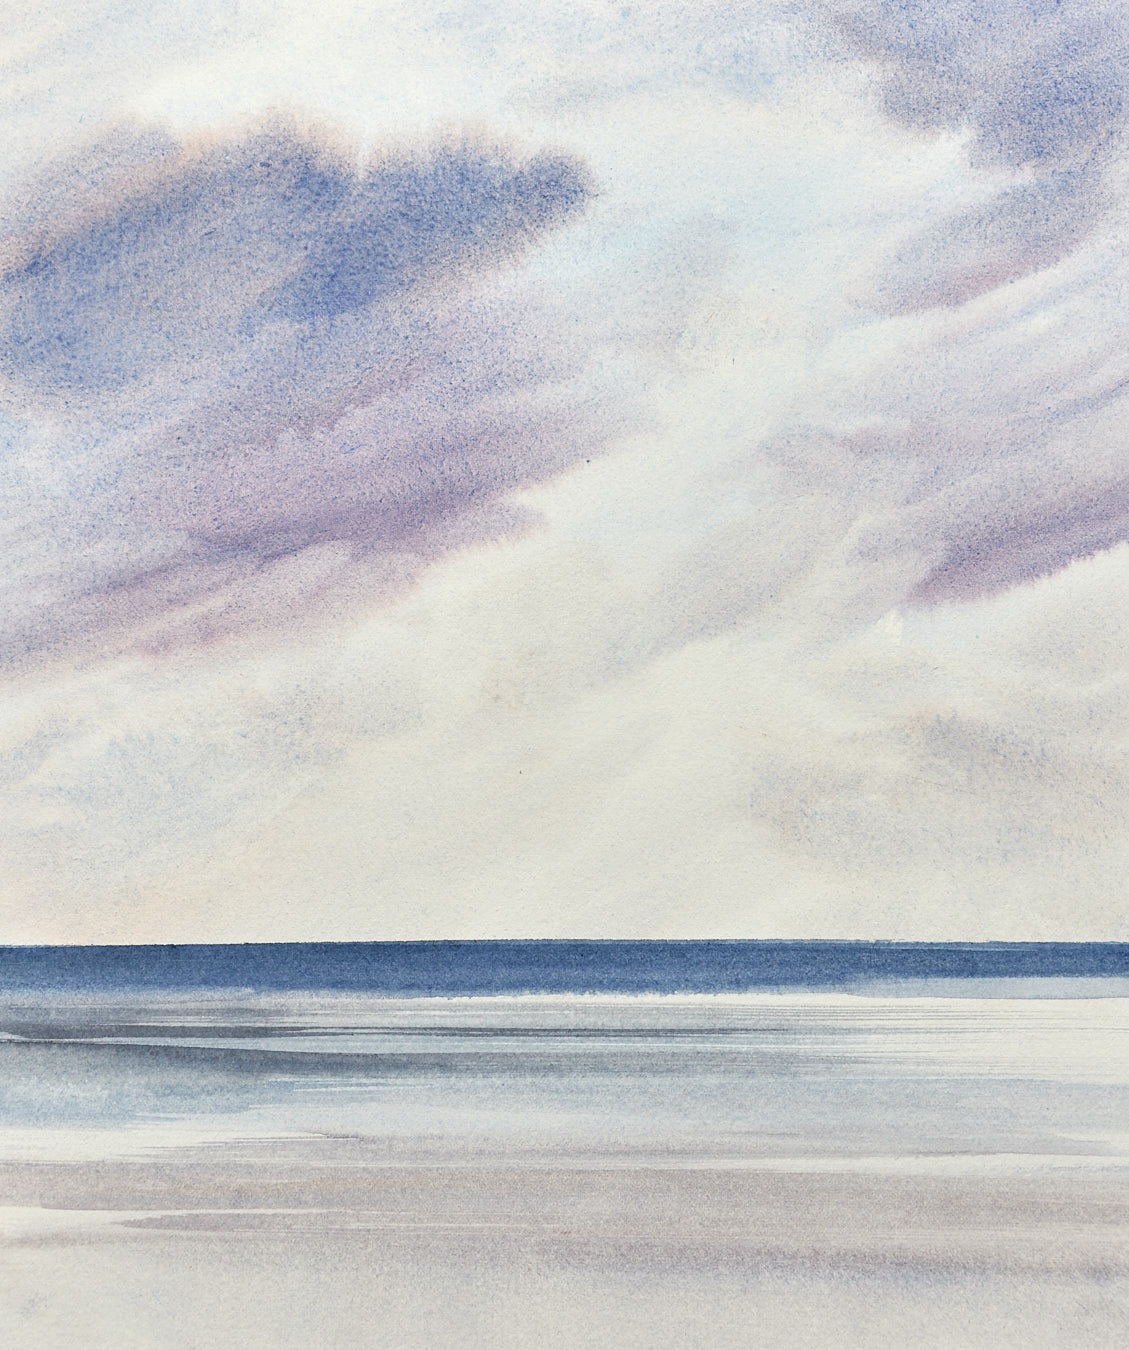 Large image of Light across the sea original watercolour painting